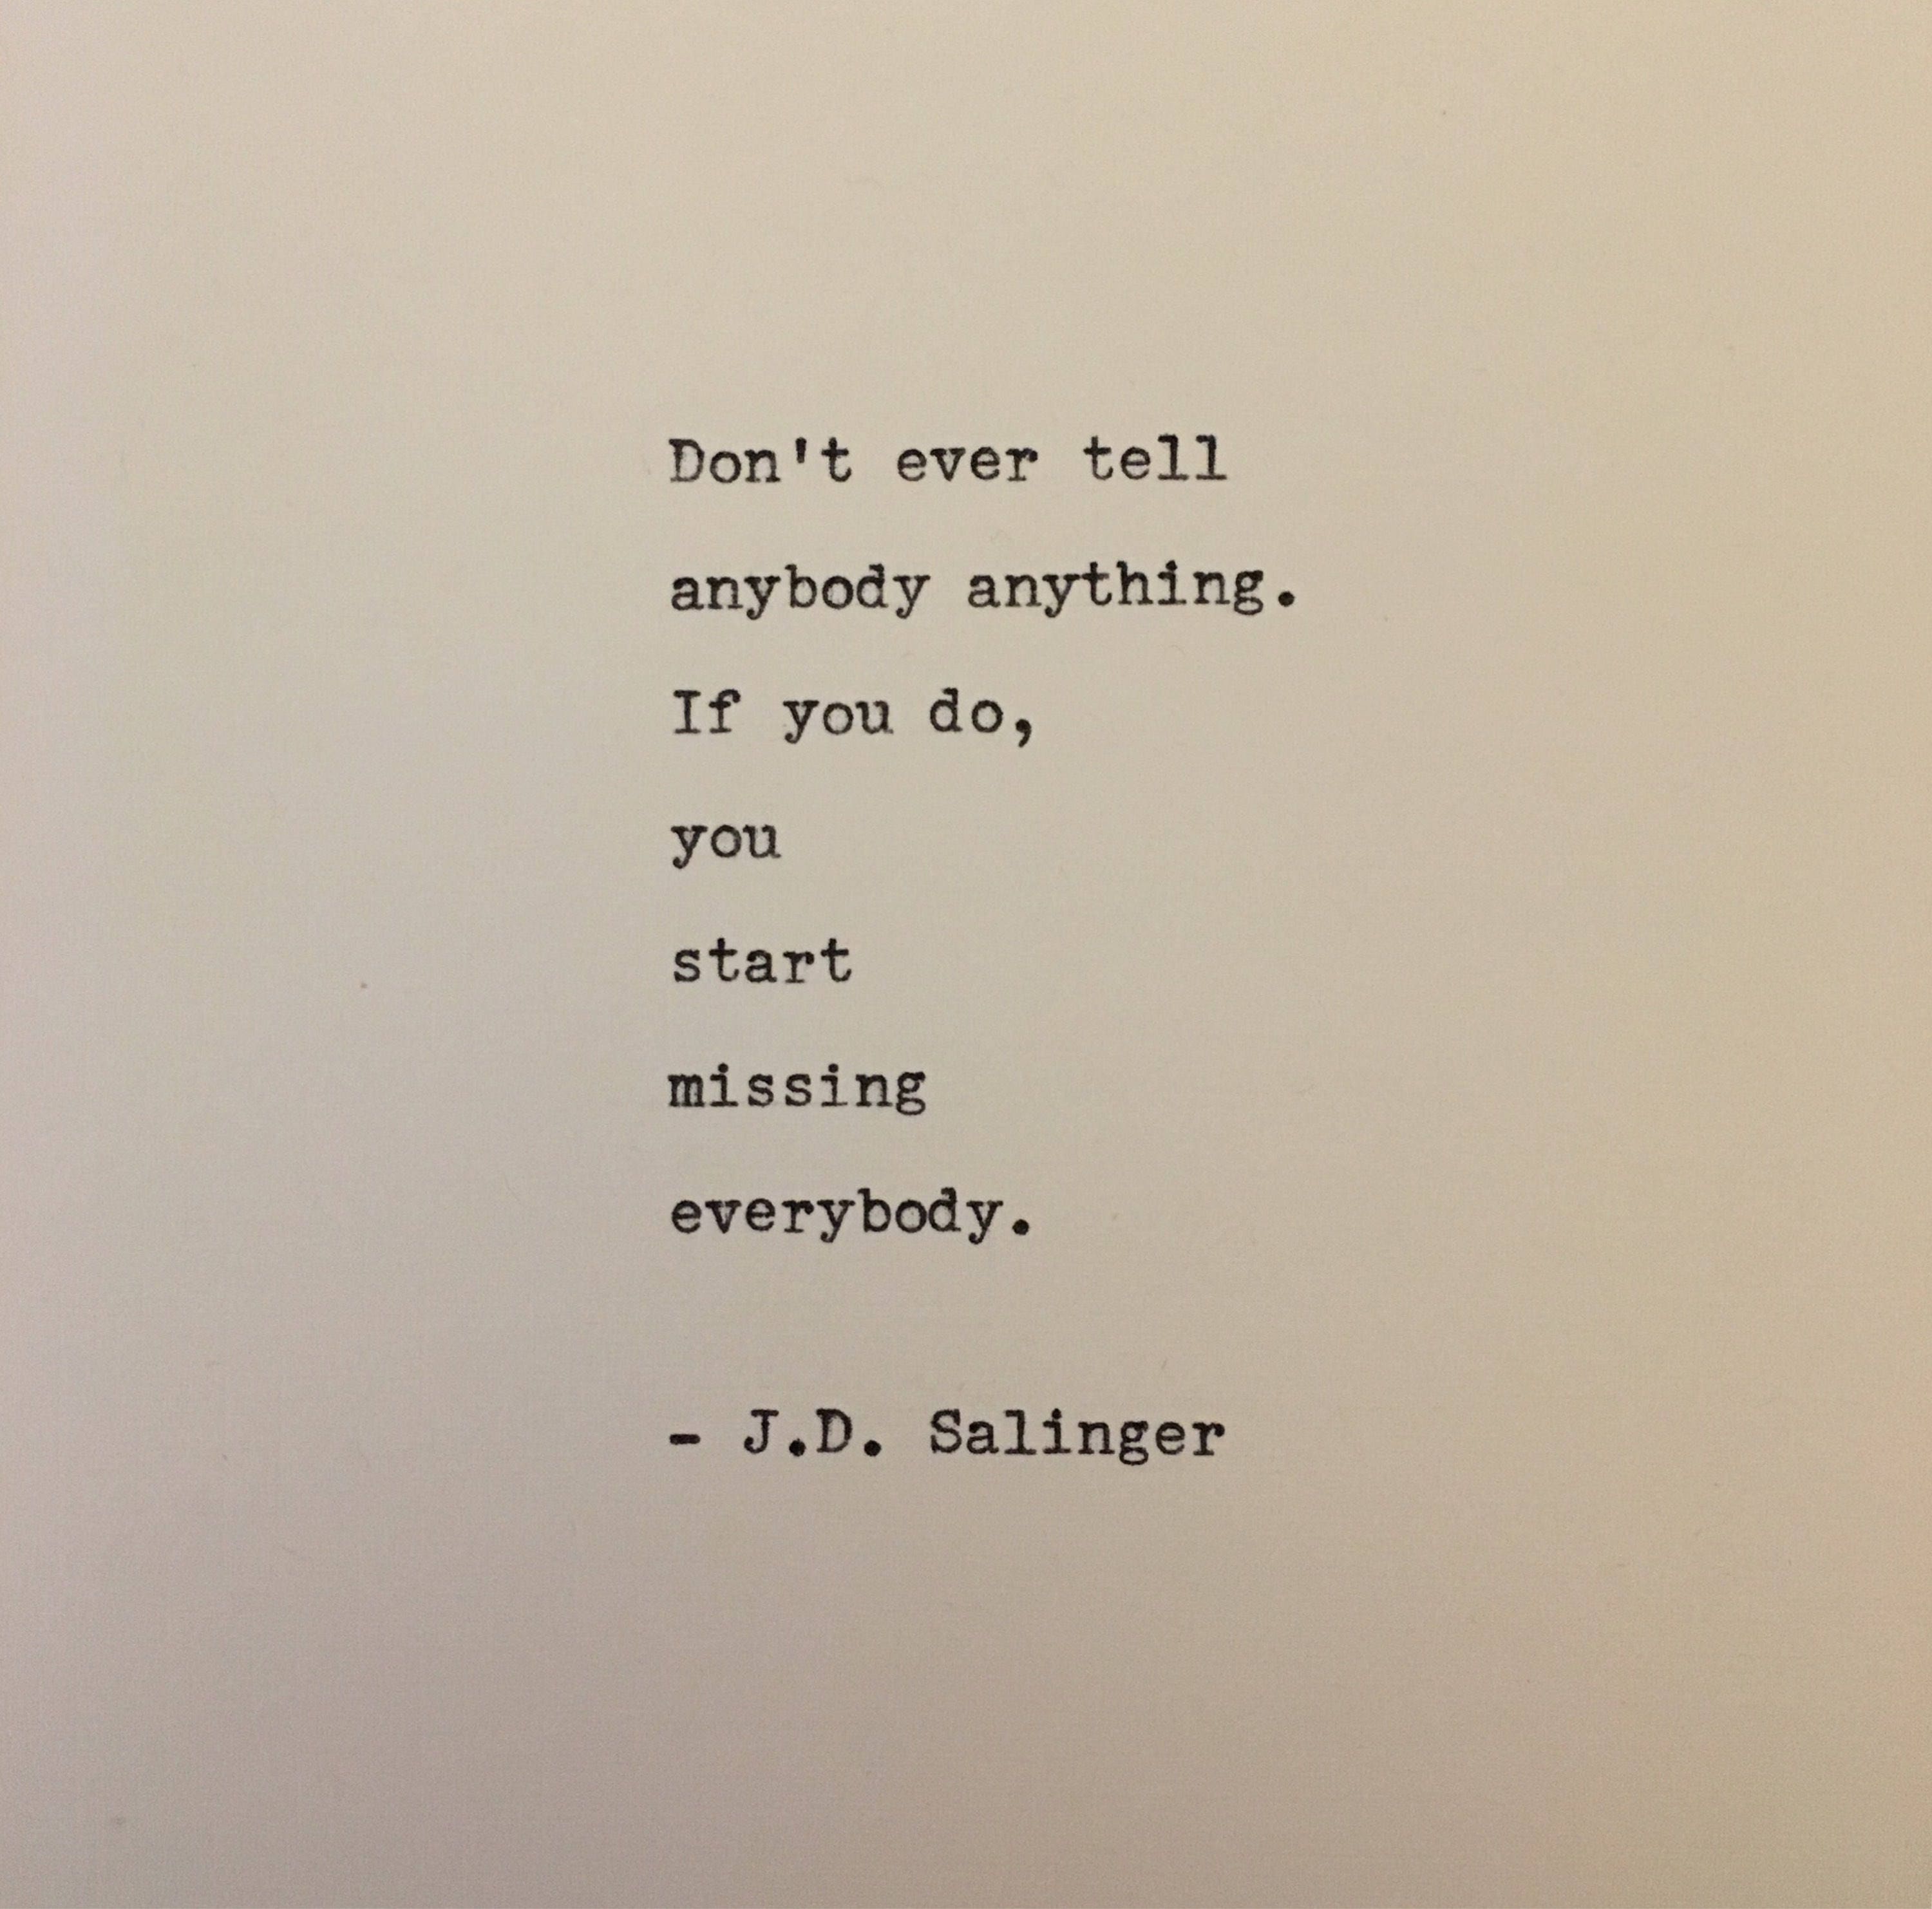 J.D. Salinger Catcher in the Rye Quote Typed on Typewriter | Etsy